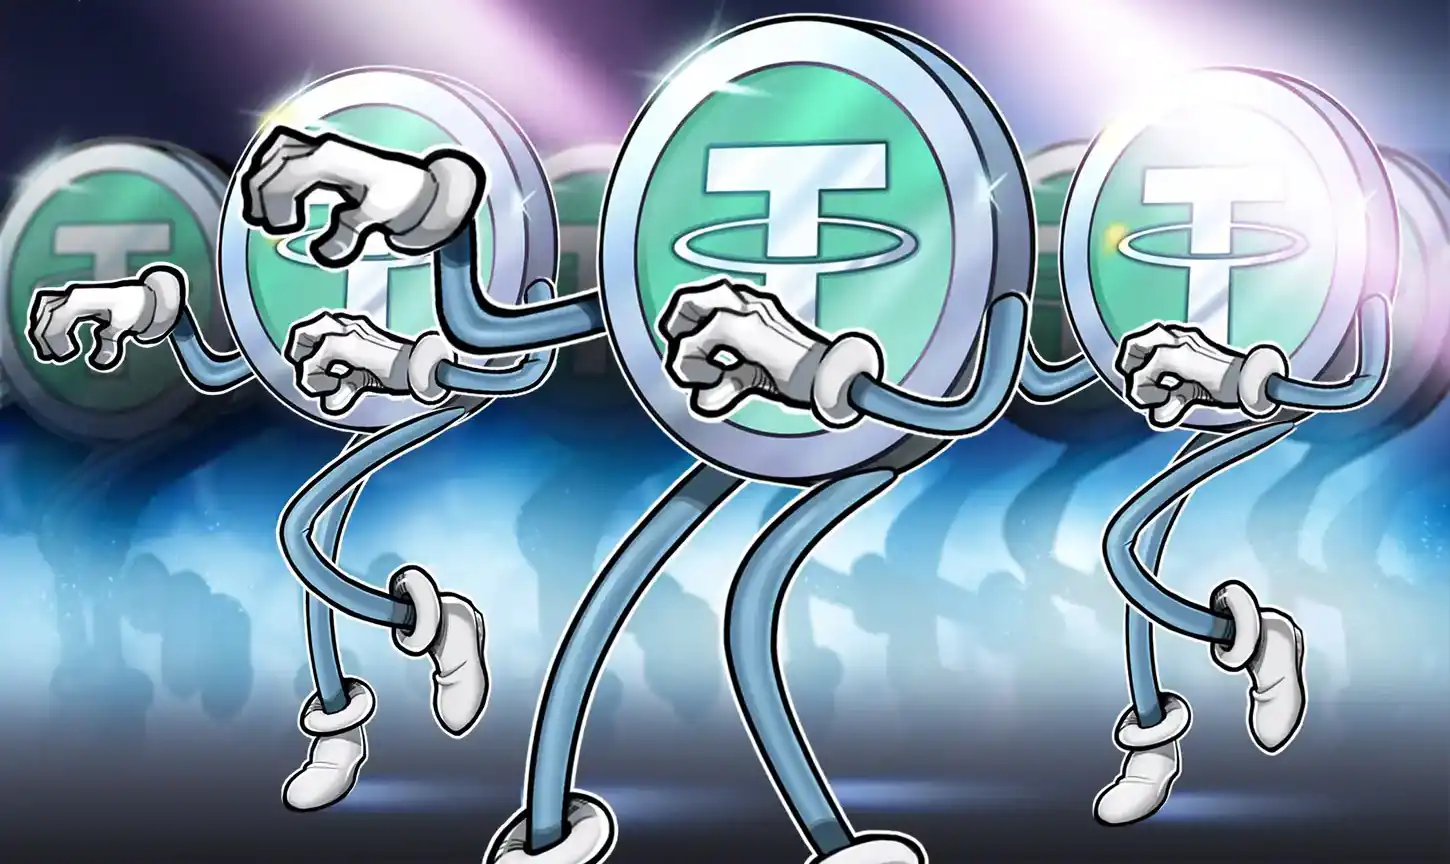 Tether Launches Recovery Tool Amid $100B Market Cap Milestone